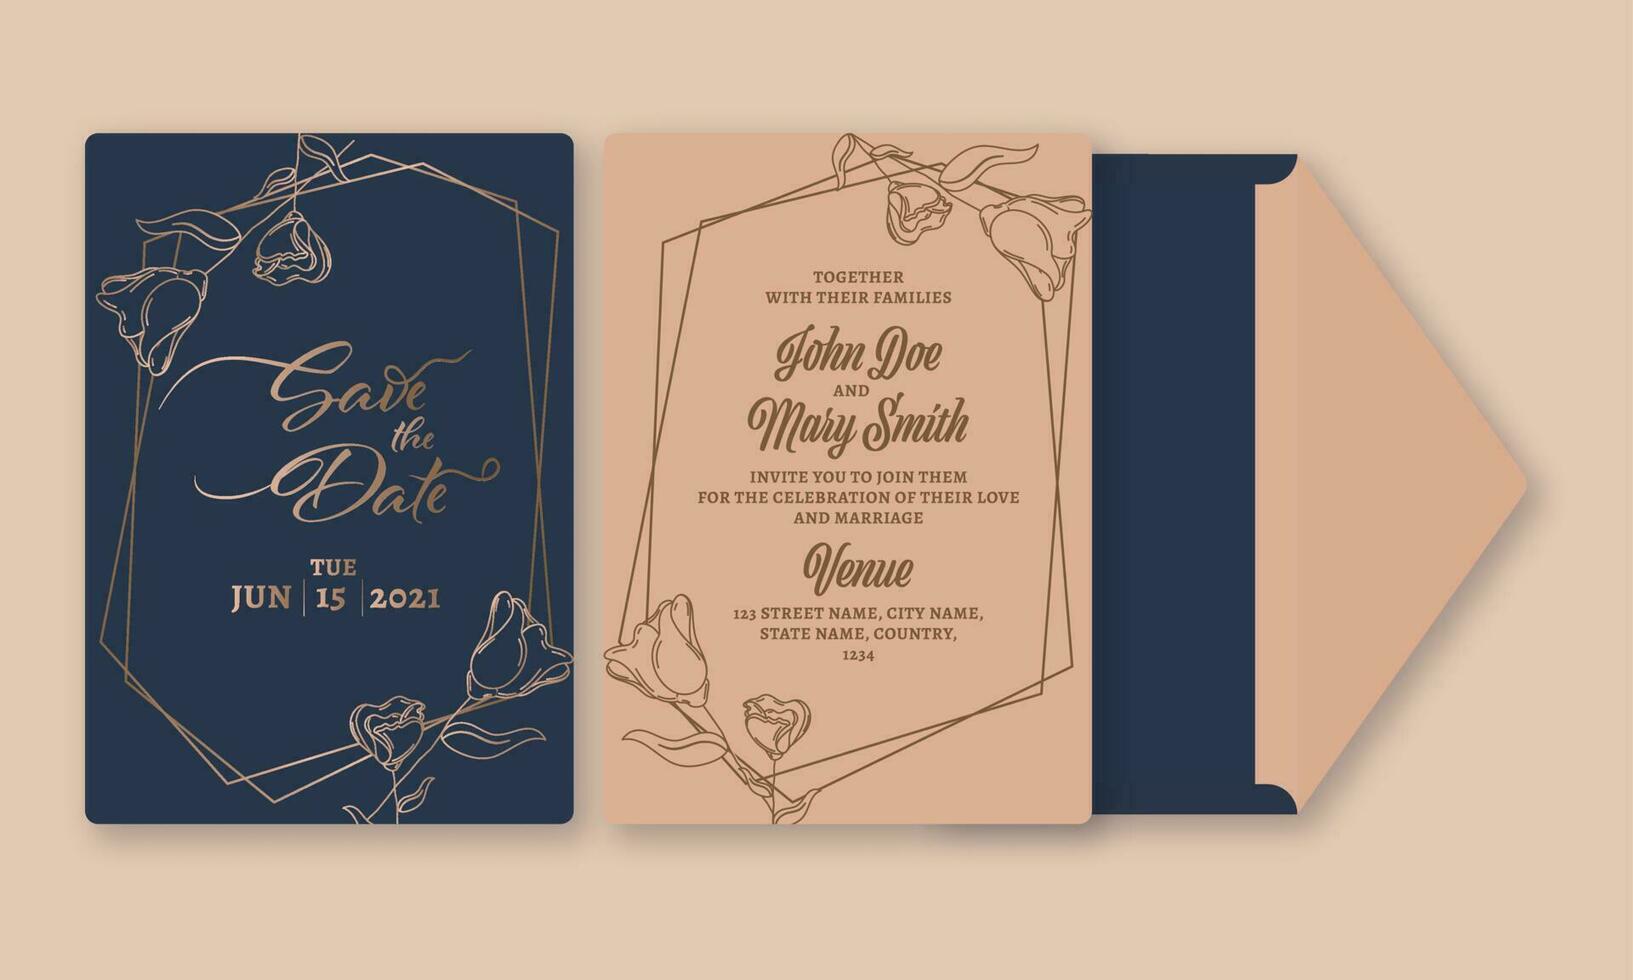 Elegance Wedding Card Template Design With Double-Sides In Blue And Brown Color. vector